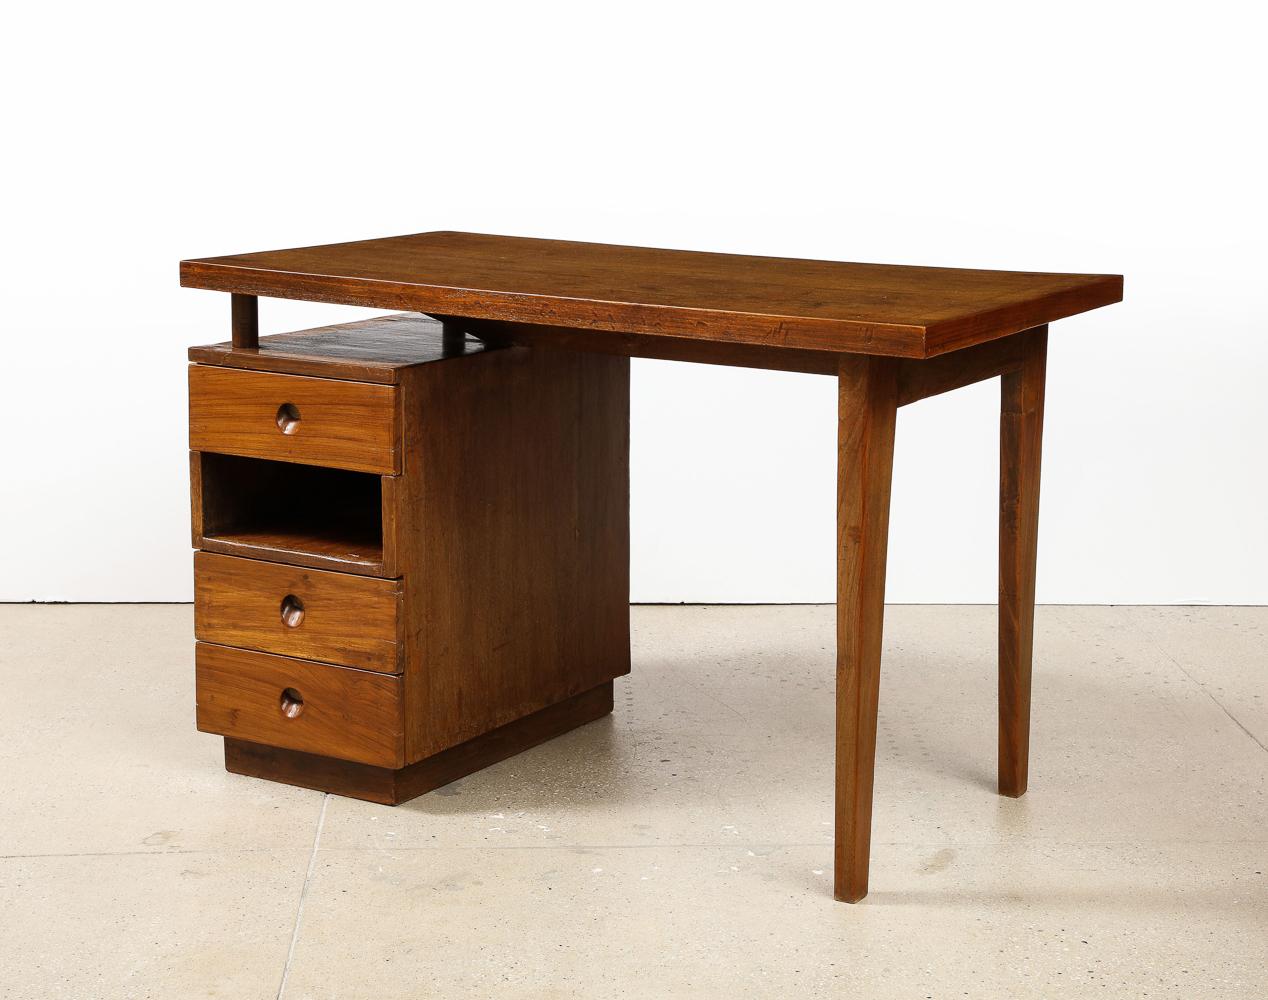 Teak, bamboo caning, fabric. Desk with 3 drawers and 1 open compartment. and matching chair. This desk is a very unusual variant, and one that we have not seen elsewhere. Price shown is for both pieces.
Chair h. 31